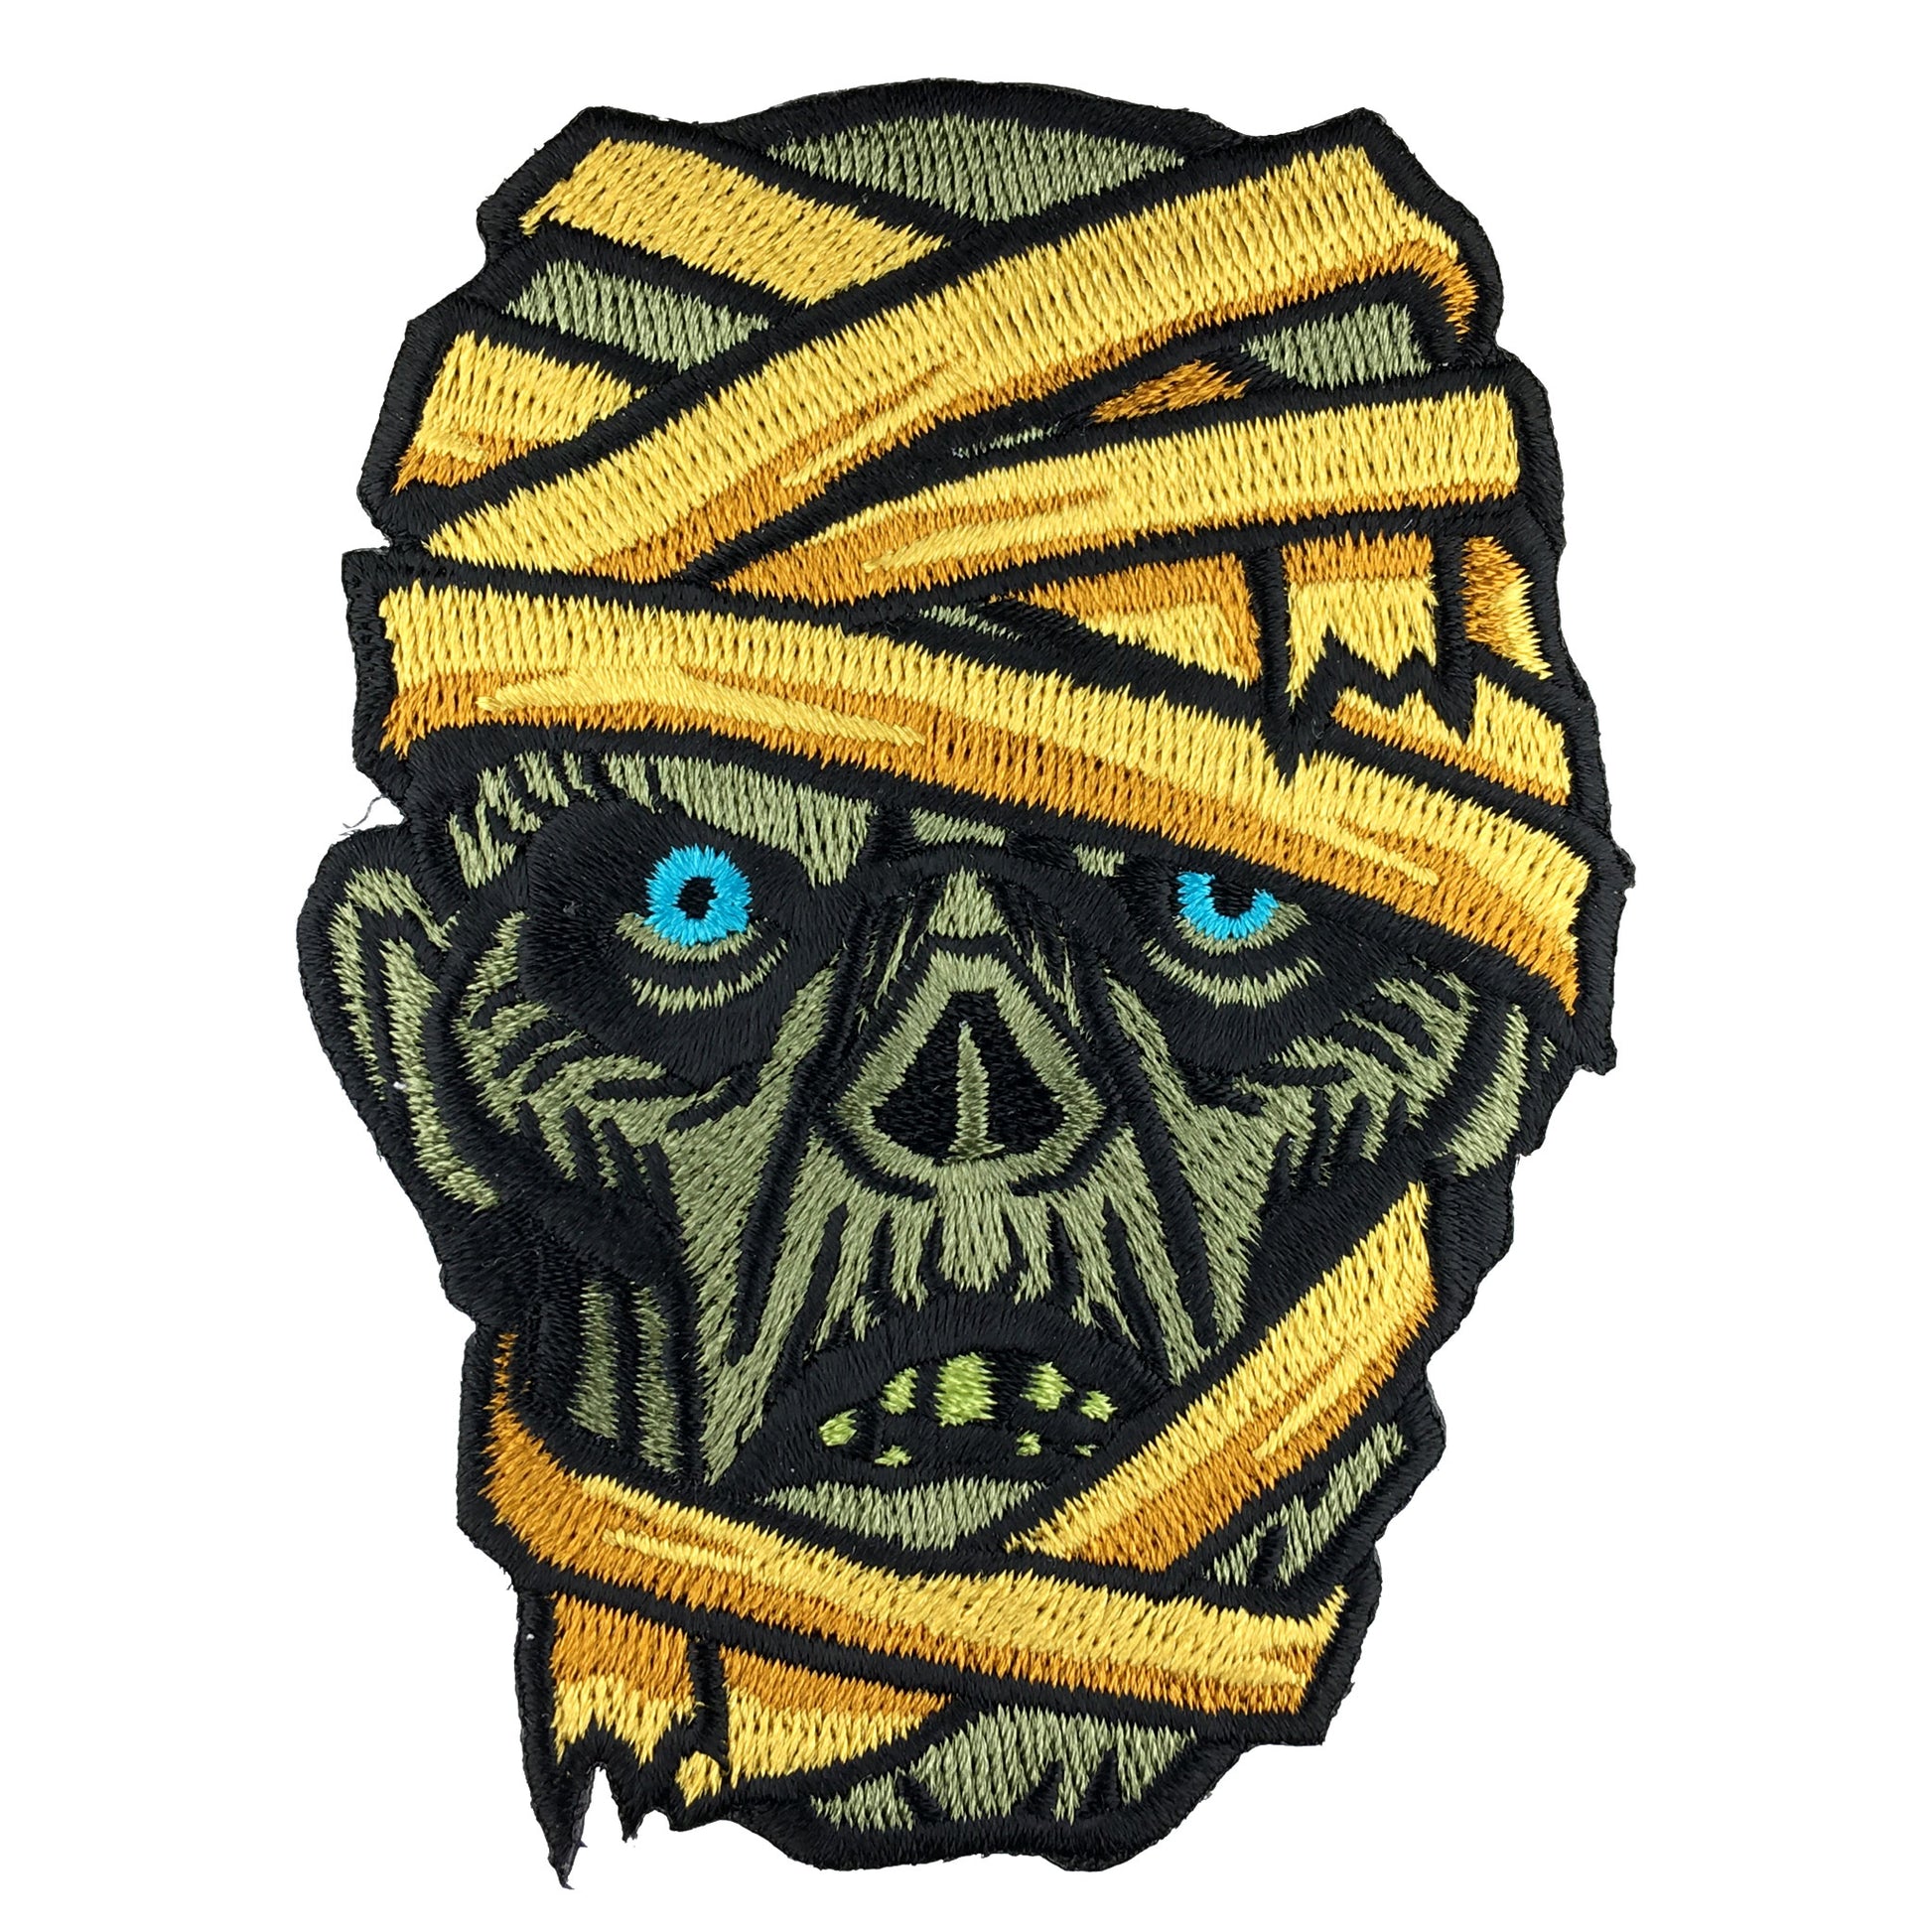 Mummy horror monster head embroidered patch by Monsterologist